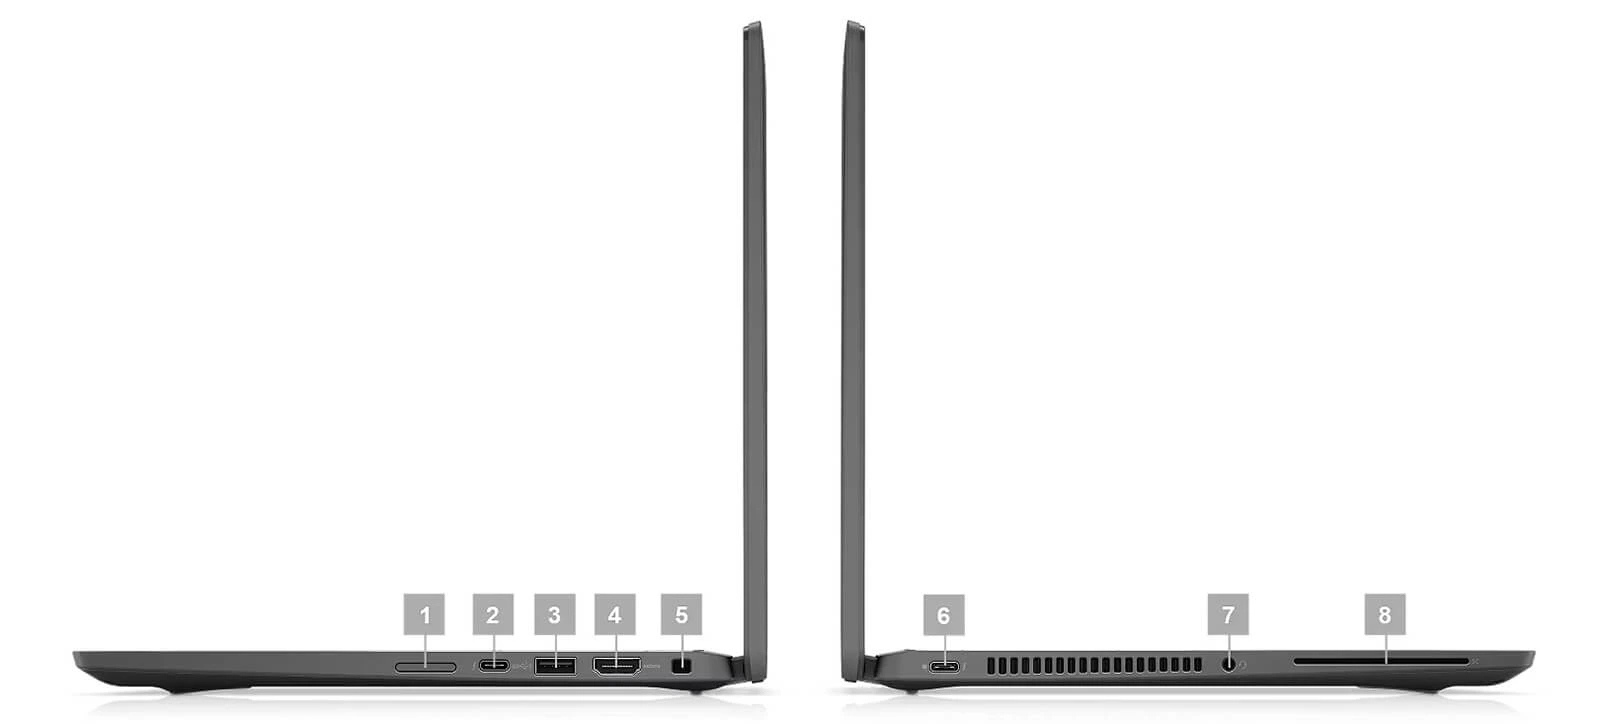 Dell Latitude 7430 (2022) Features 05